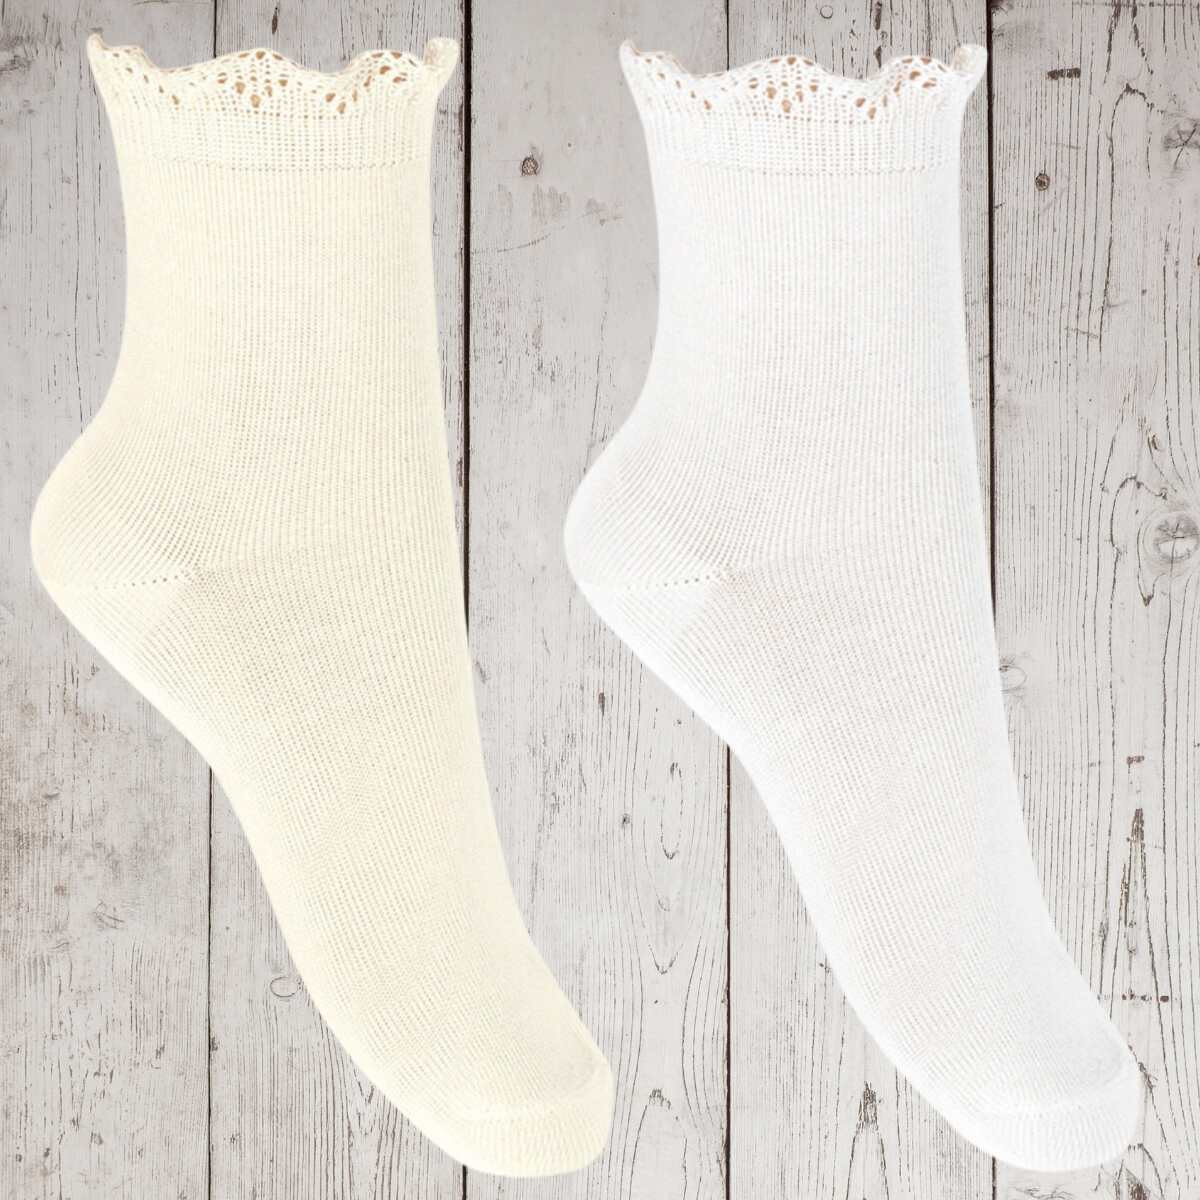 CEREMONY SOCKS WITH PATTERNED CUFF CONDOR - 1